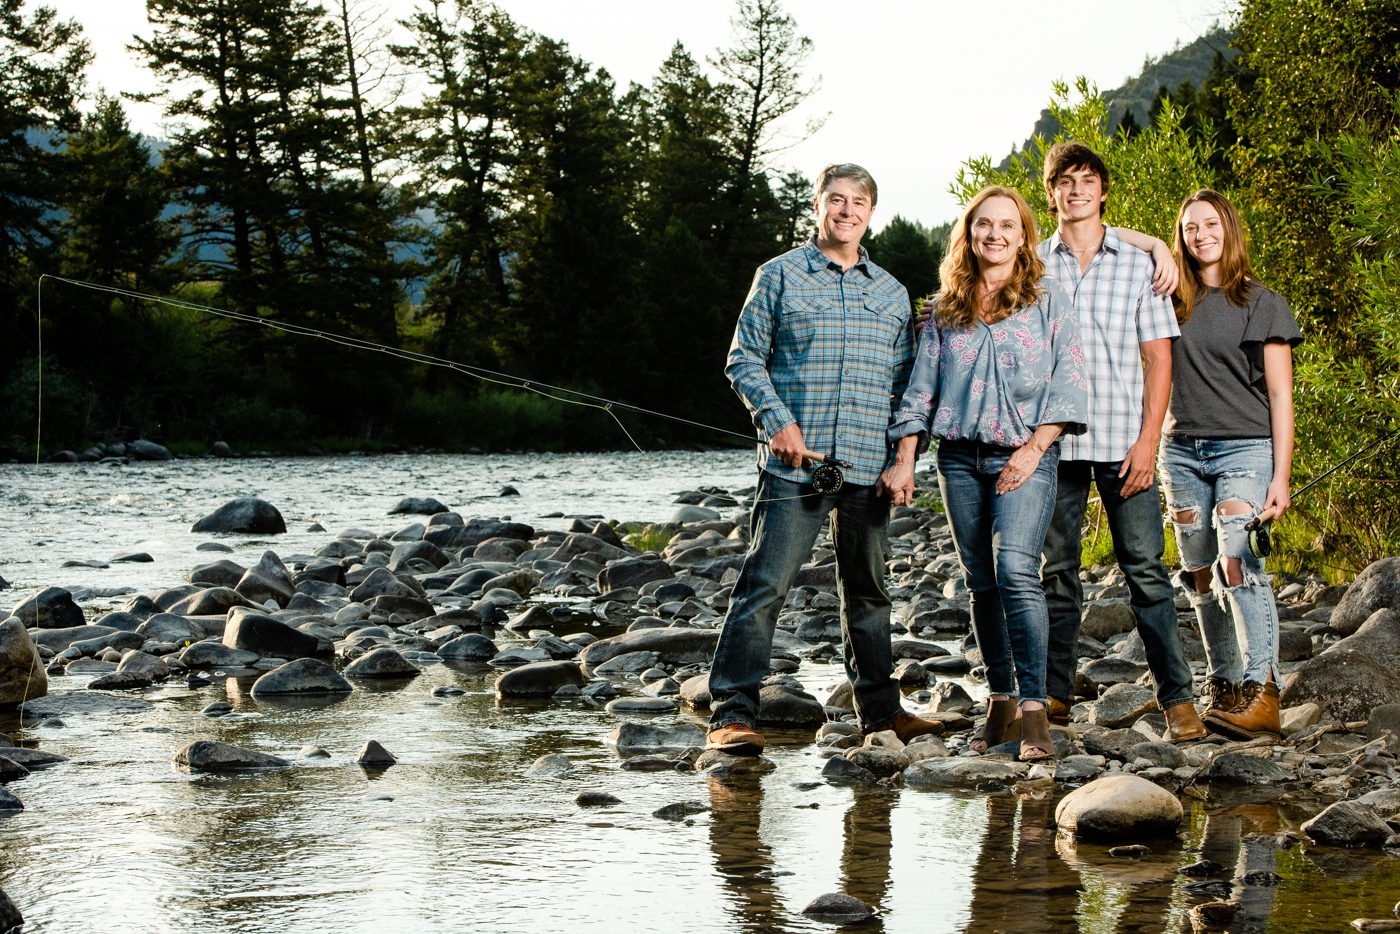 flyfishing-family-stand-on-gallatin-river-portrait